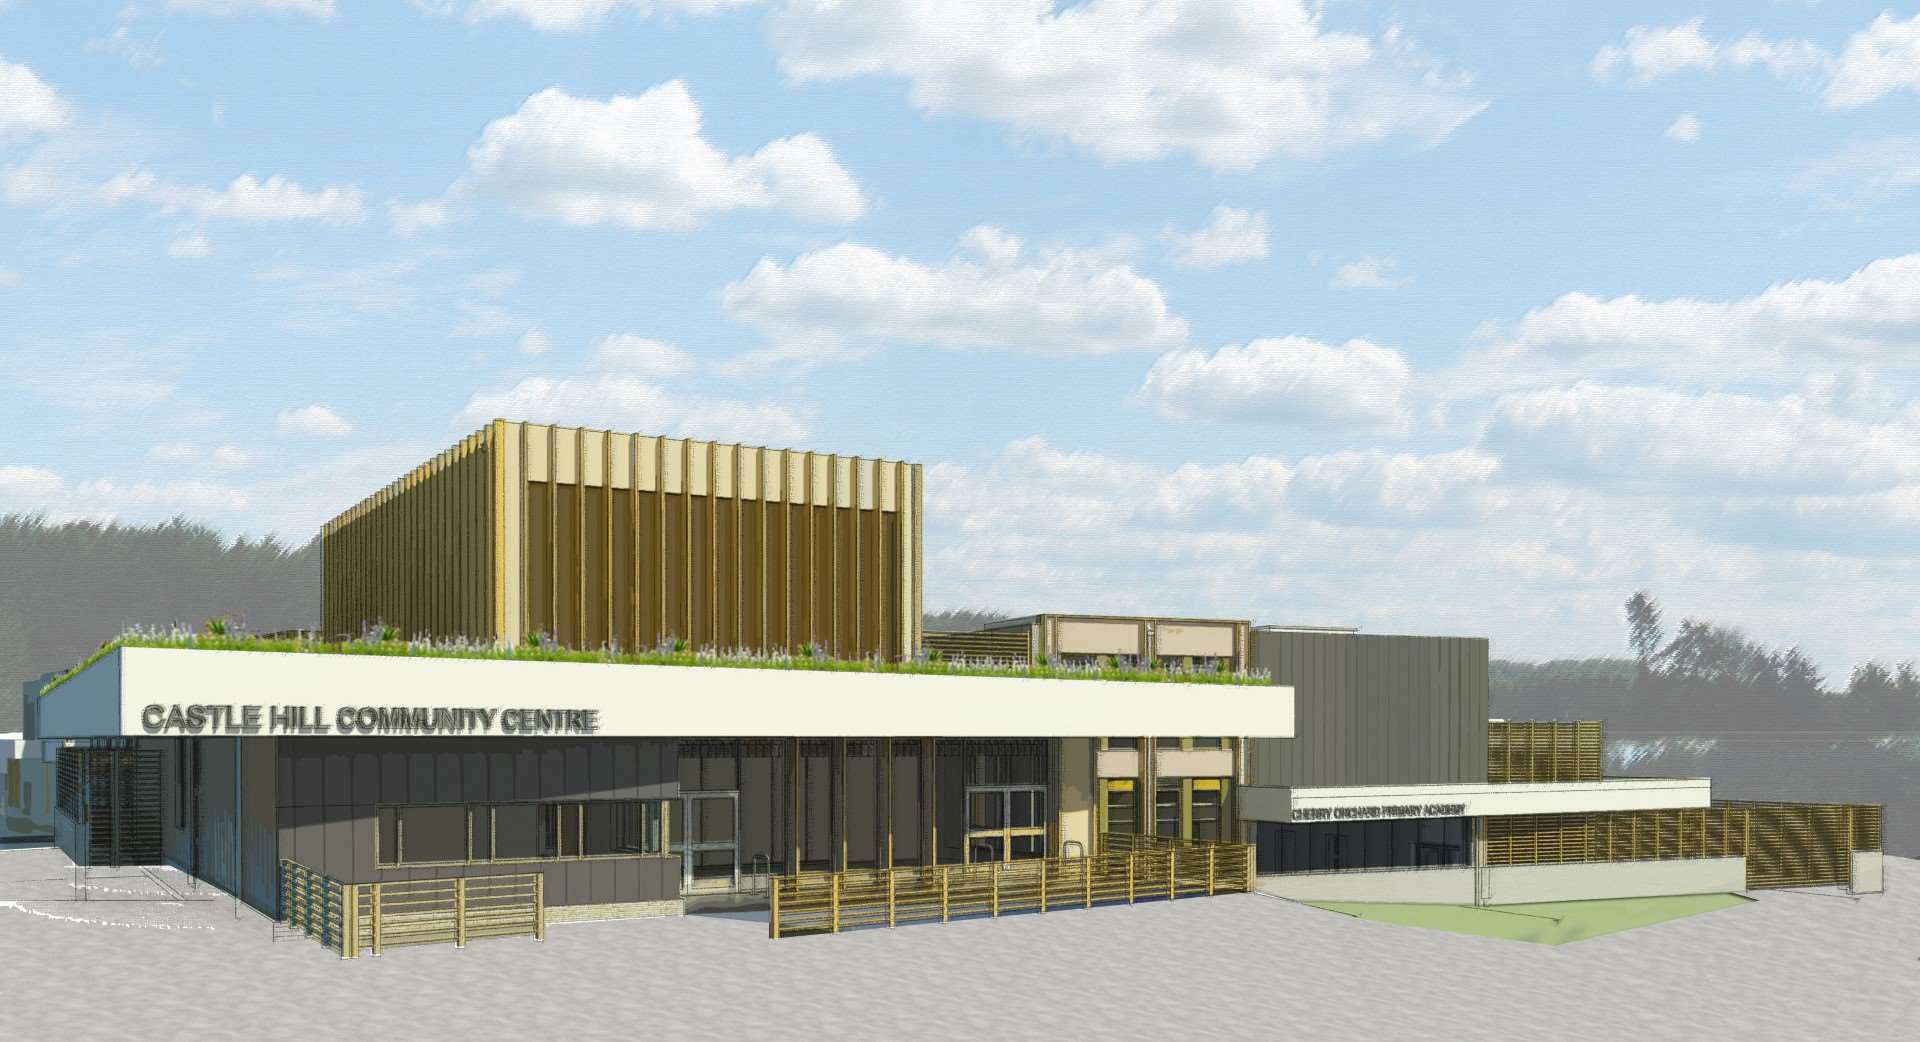 The application also featured plans for a community centre. Artist's impression from architect Lee Evans Partnership.